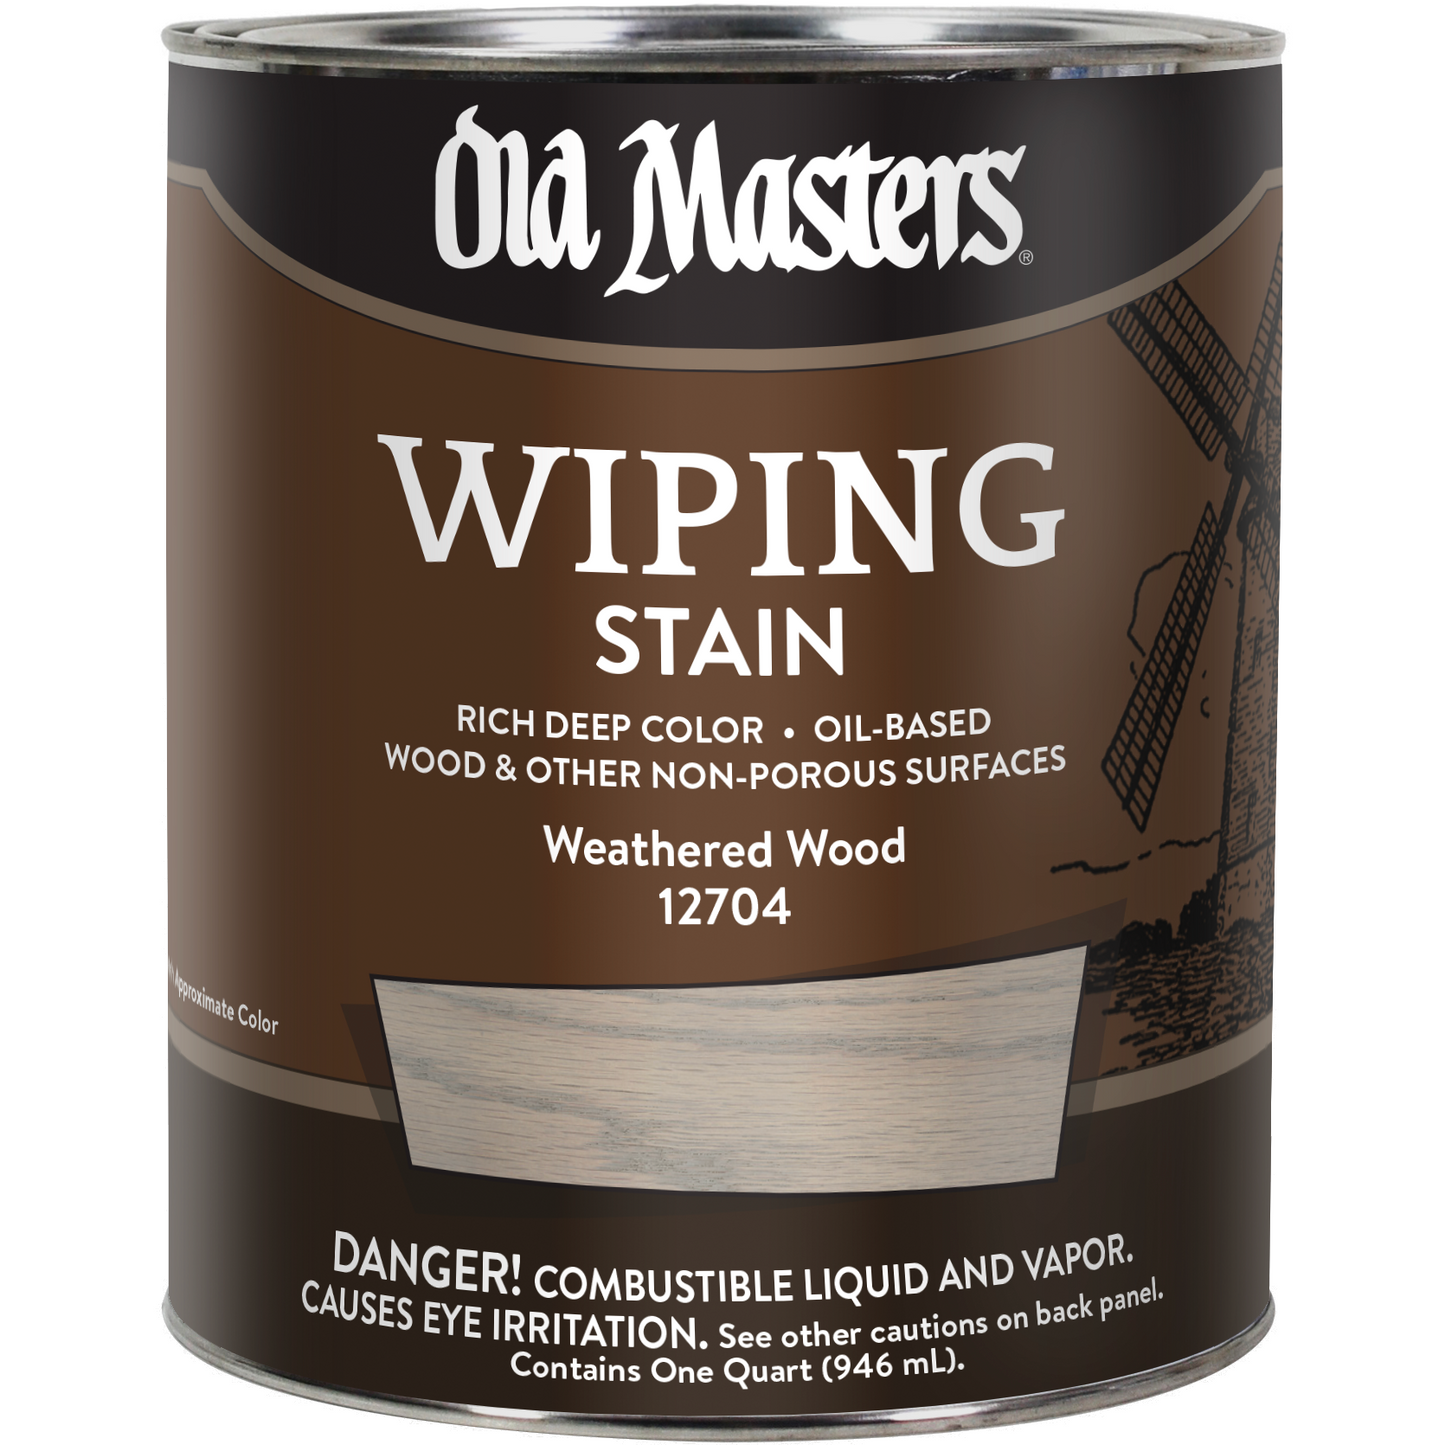 Old Masters Wiping Stain - Weathered Wood